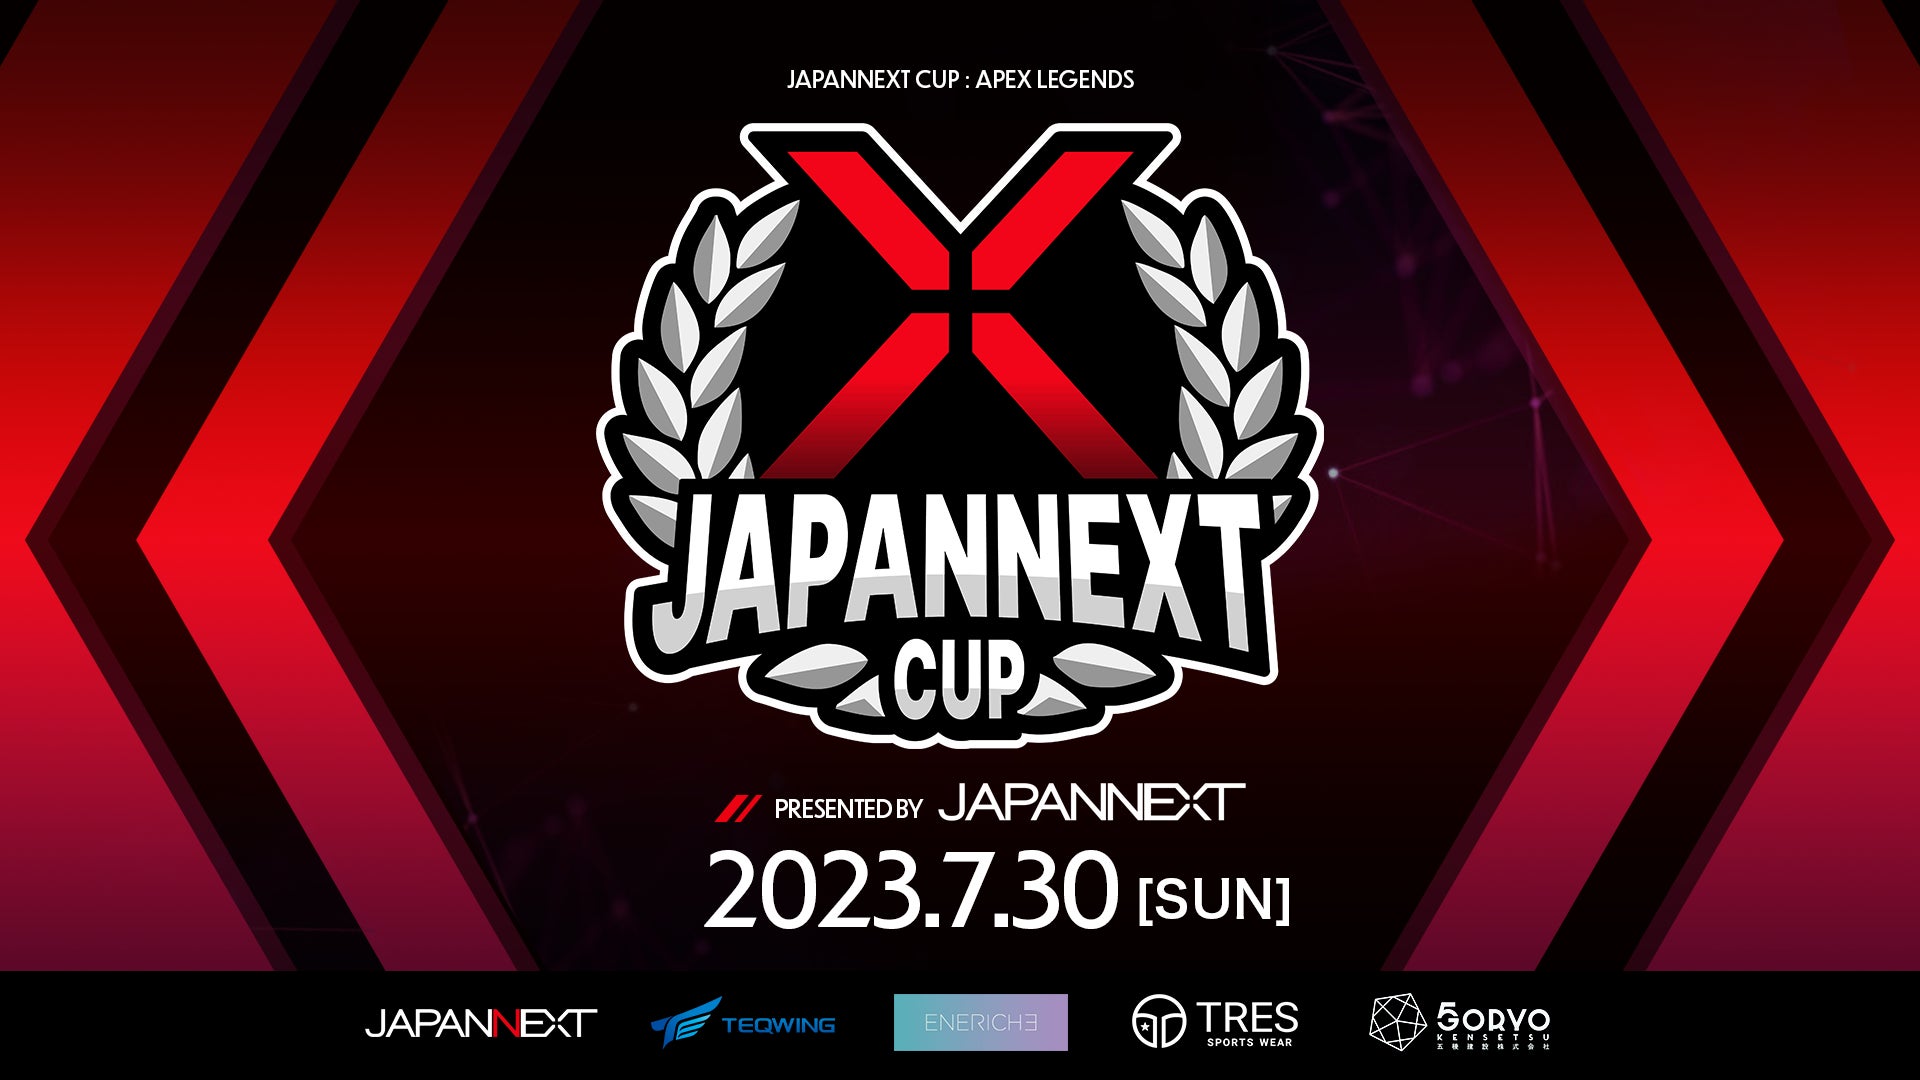 TEQWINGがApex Legendsカスタム大会「第2回JAPANNEXT CUP」を開催！